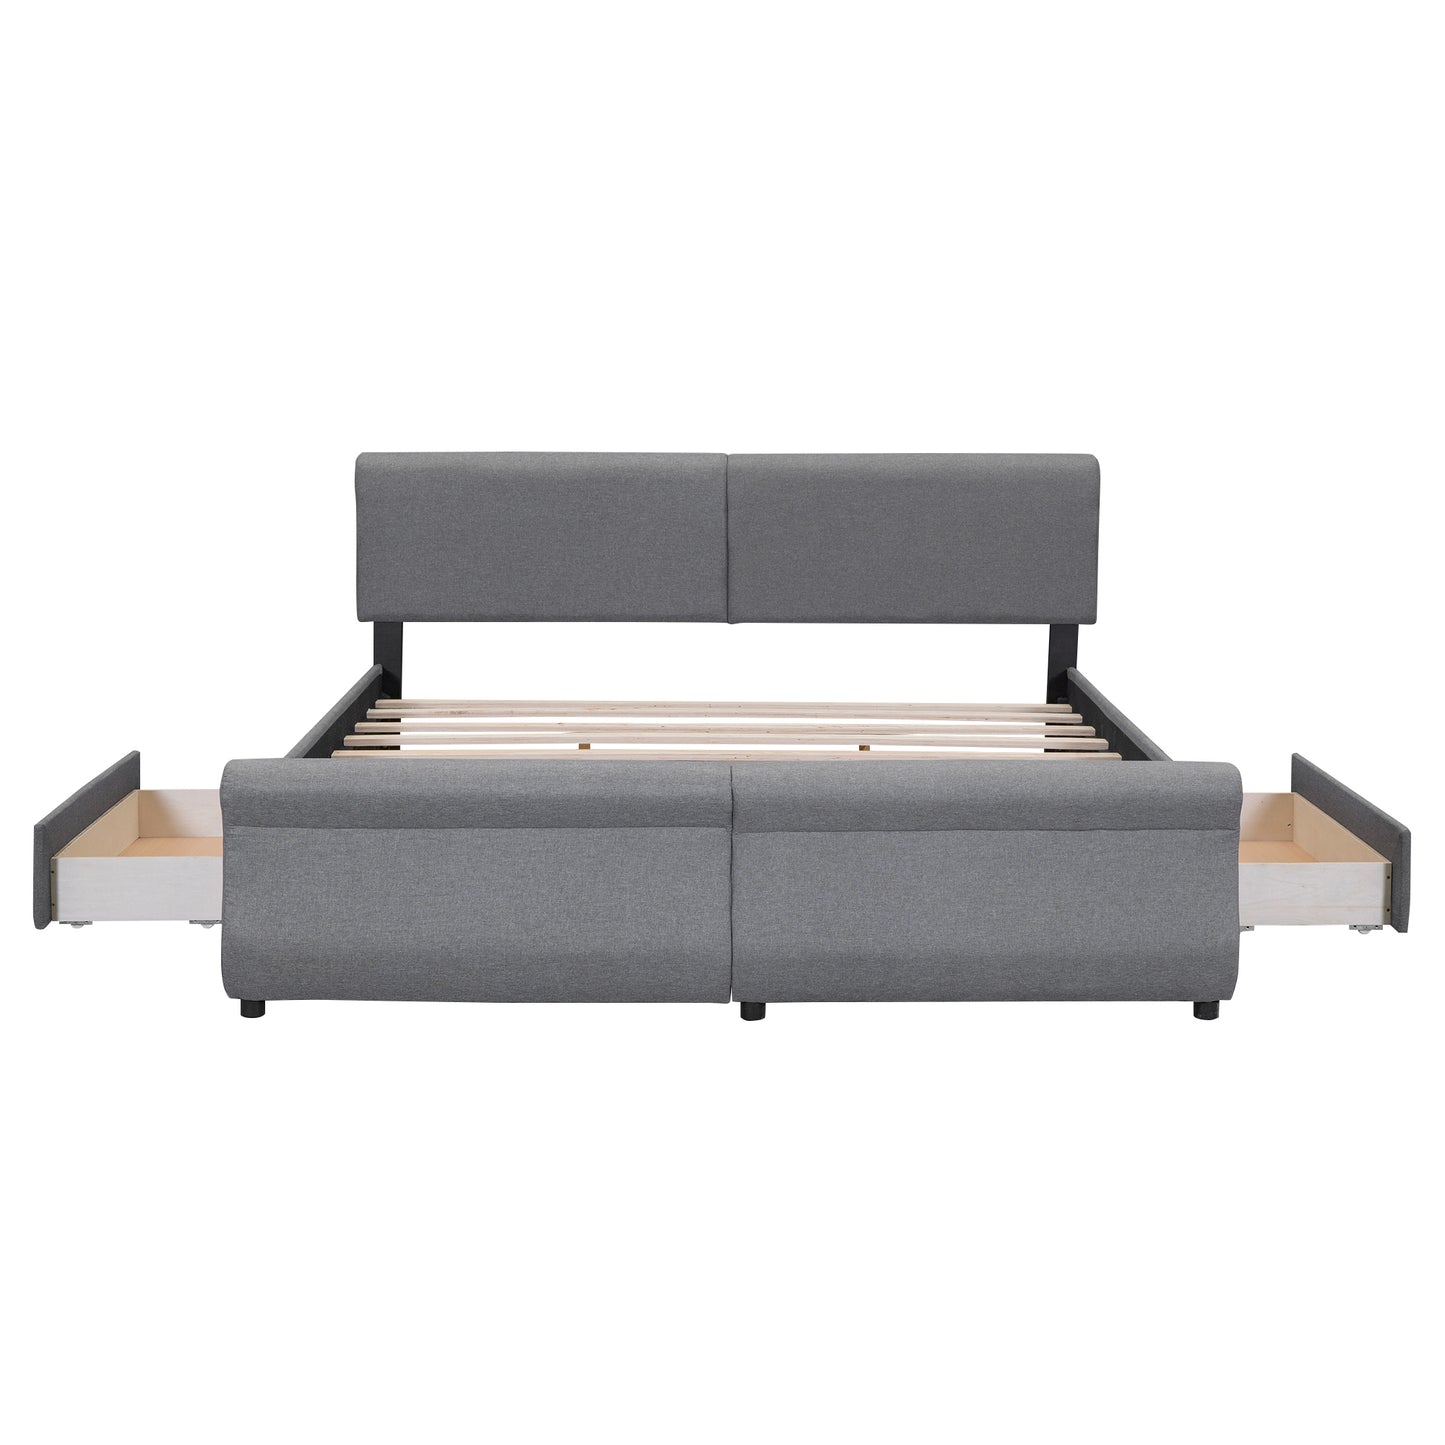 King Size Upholstery Platform Bed with Two Drawers, Gray